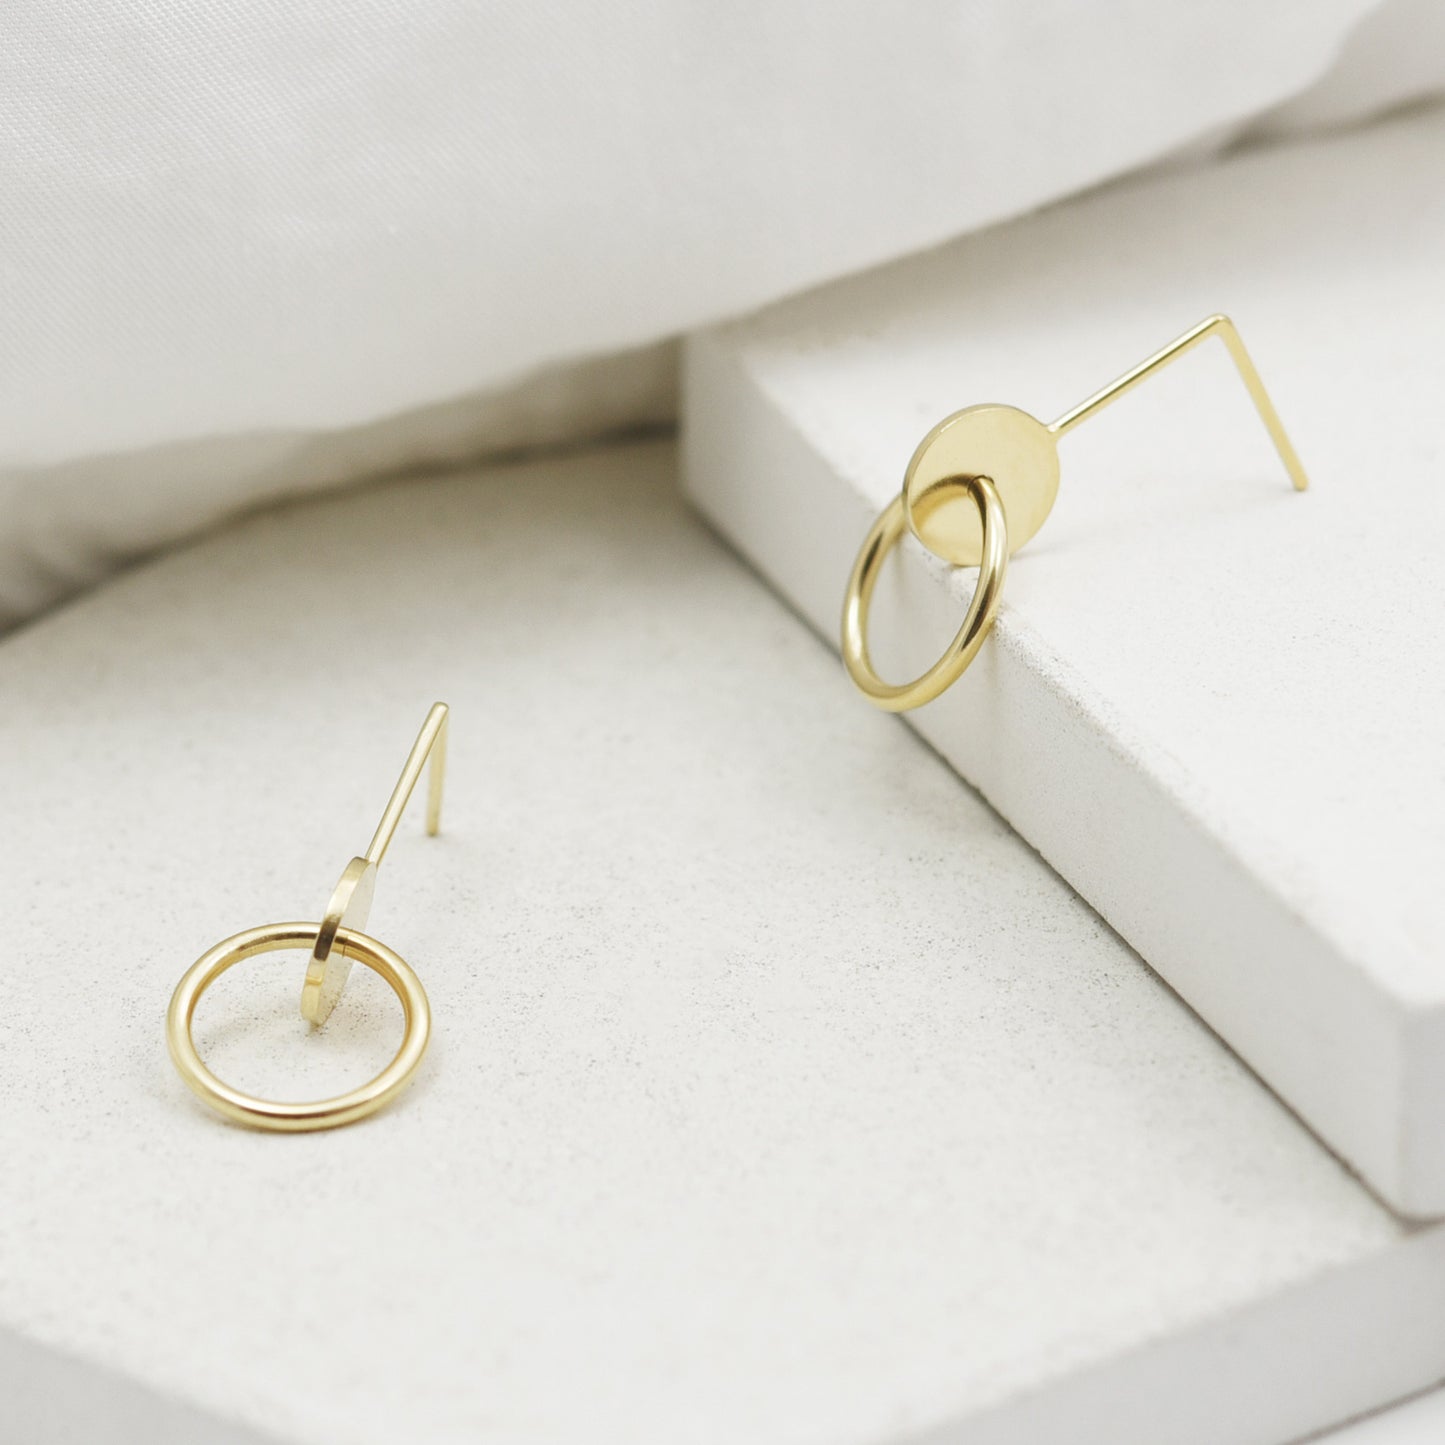 gold earrings with geometric shapes hand made by AgJc